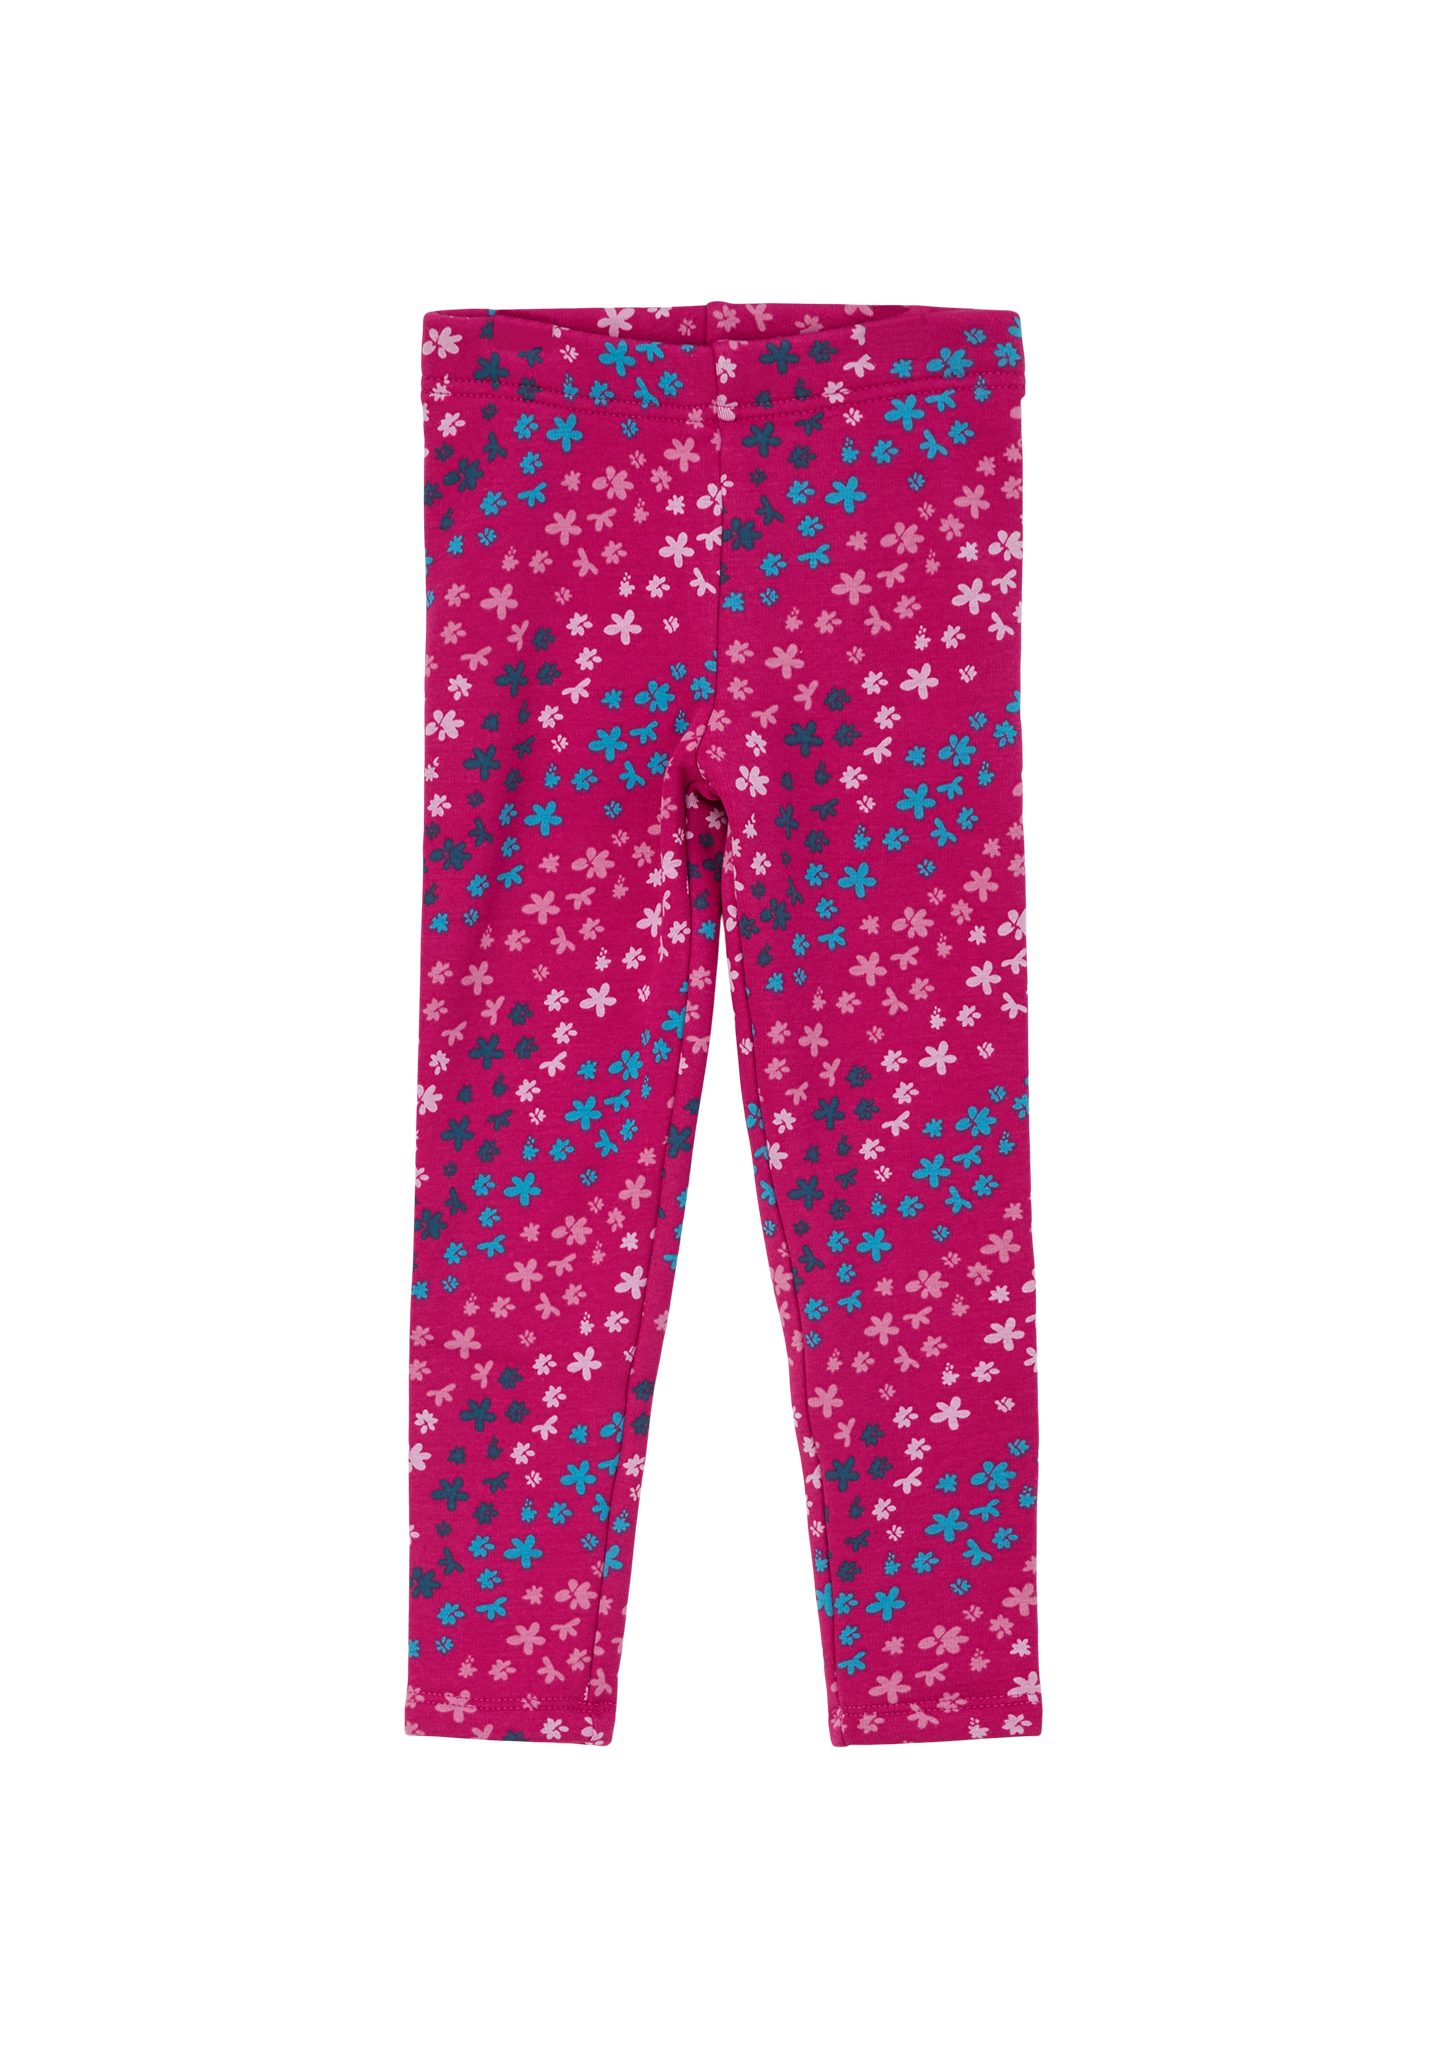 Leggings Thermofleece-Futter s.Oliver mit pink Leggings